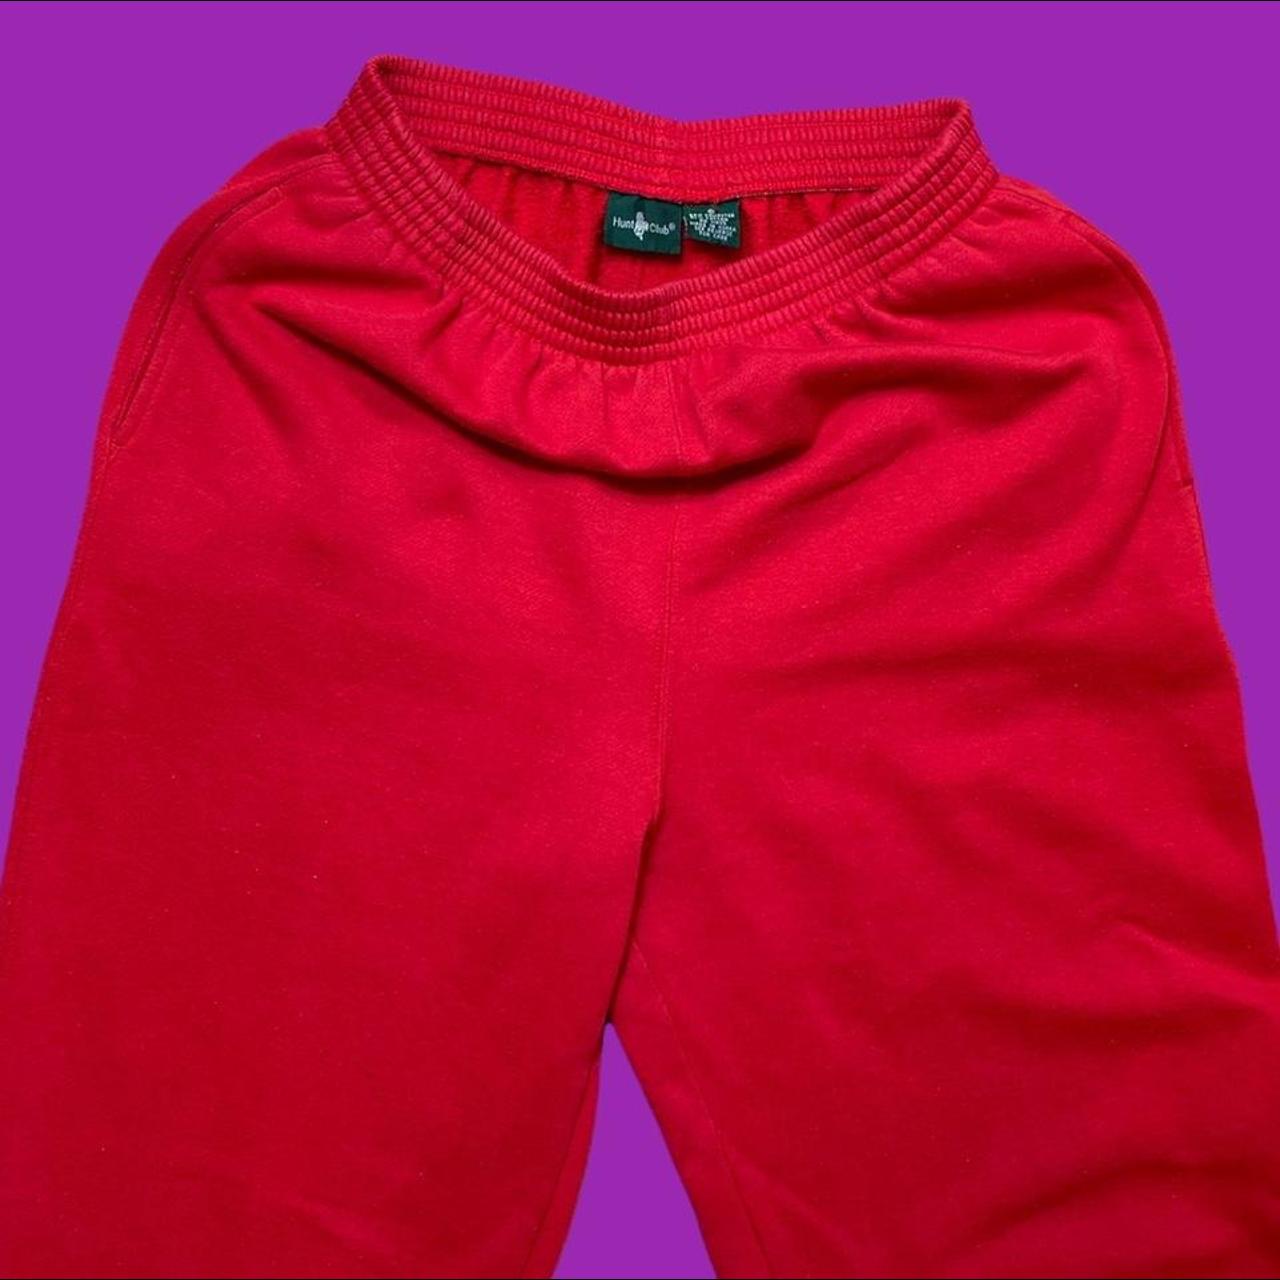 Product Image 4 - Hunt Club sweatpants 

🔴Size: Small